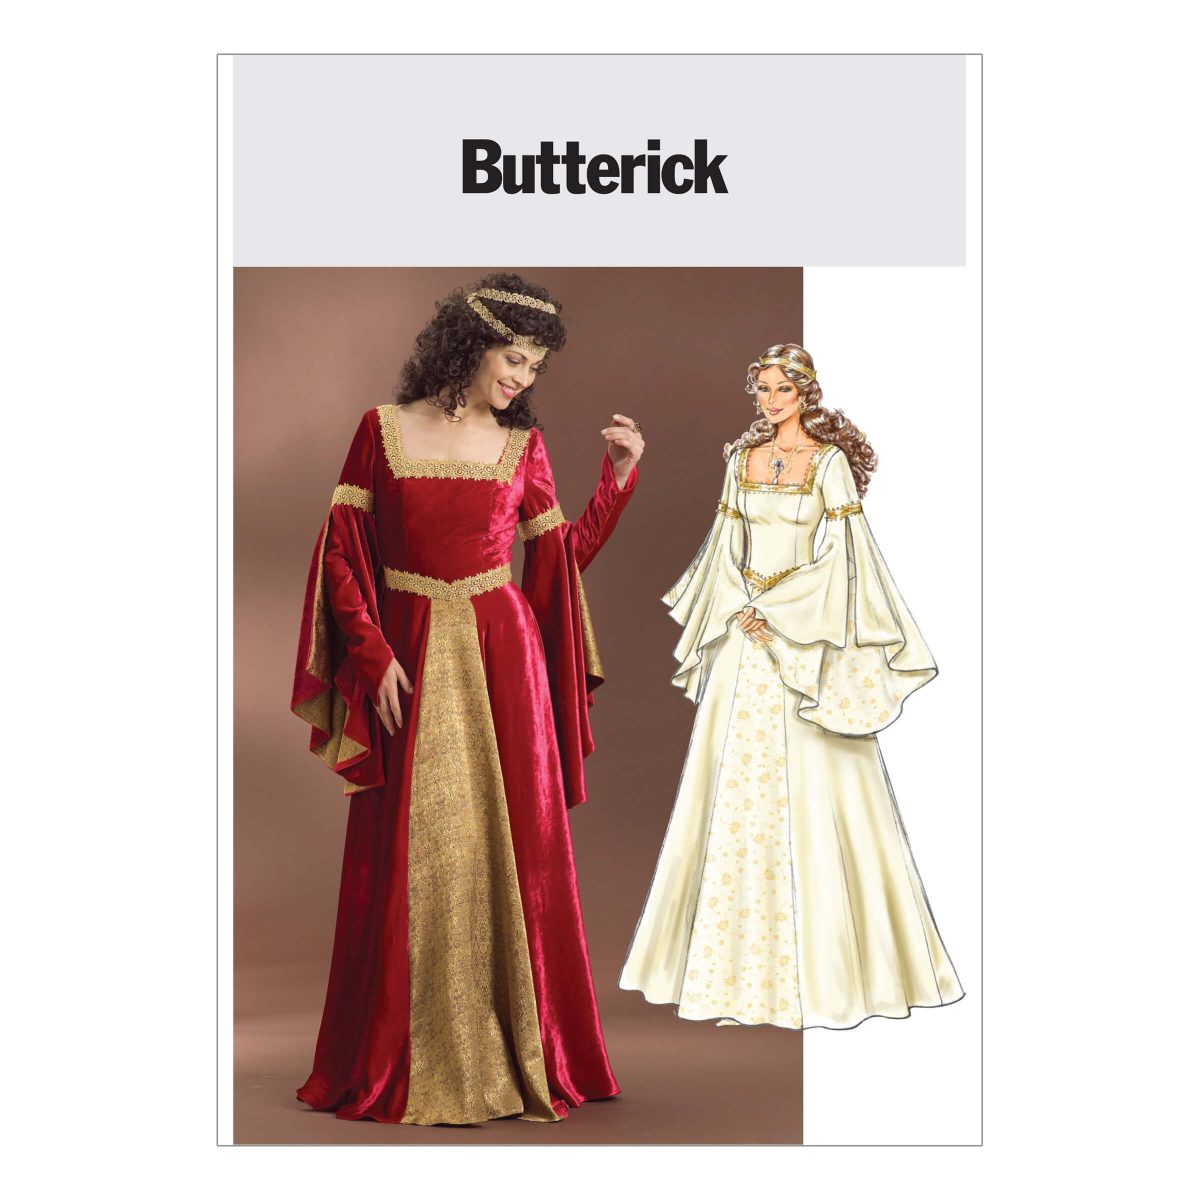 Butterick Sewing Pattern B4571 Misses' Costume